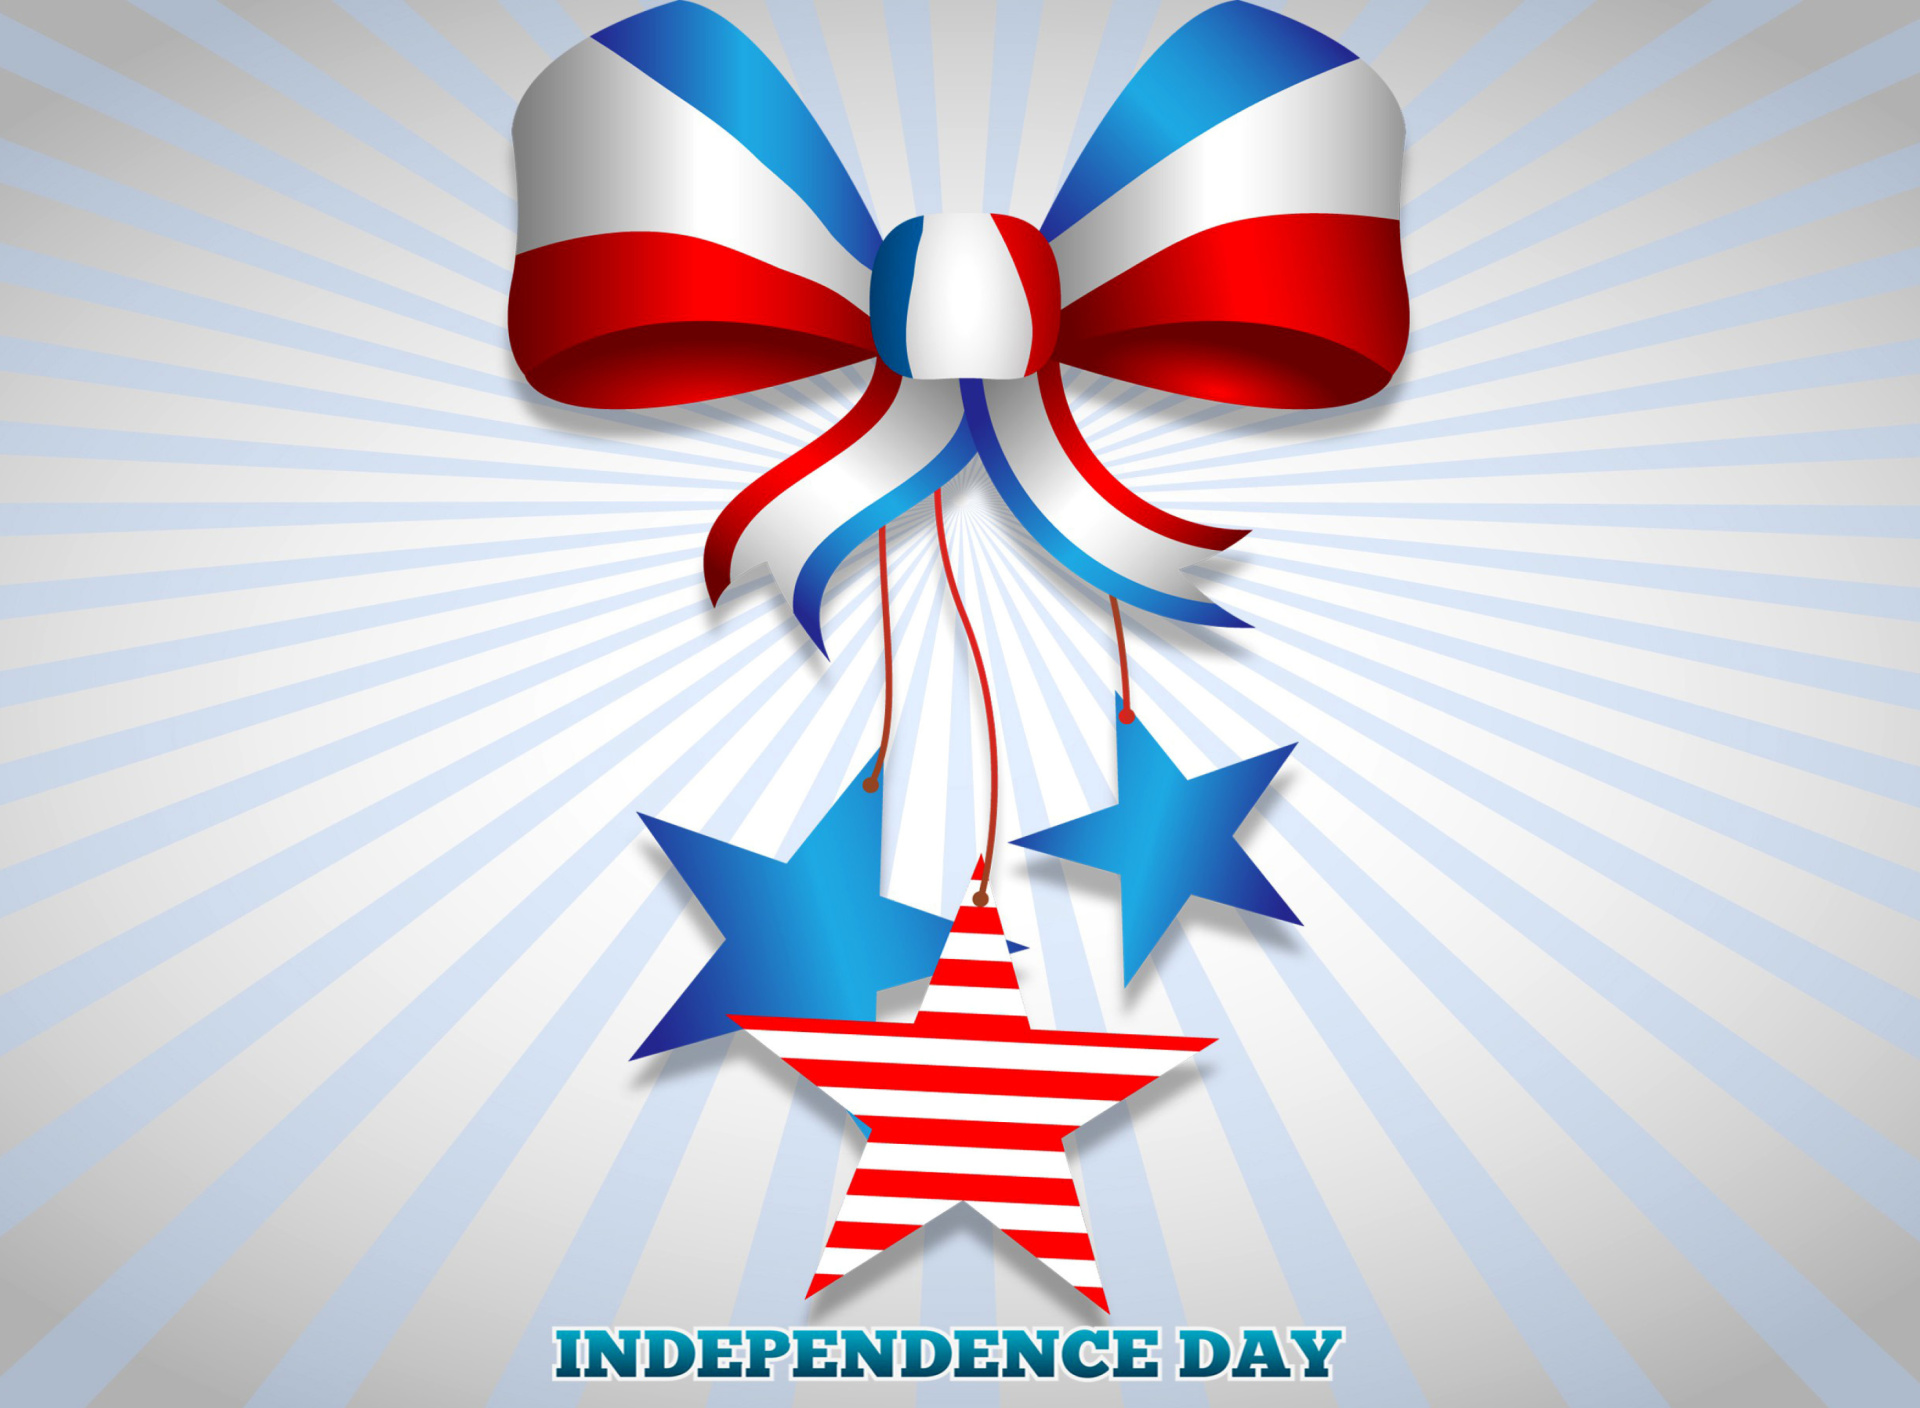 Das United states america Idependence day 4th july Wallpaper 1920x1408